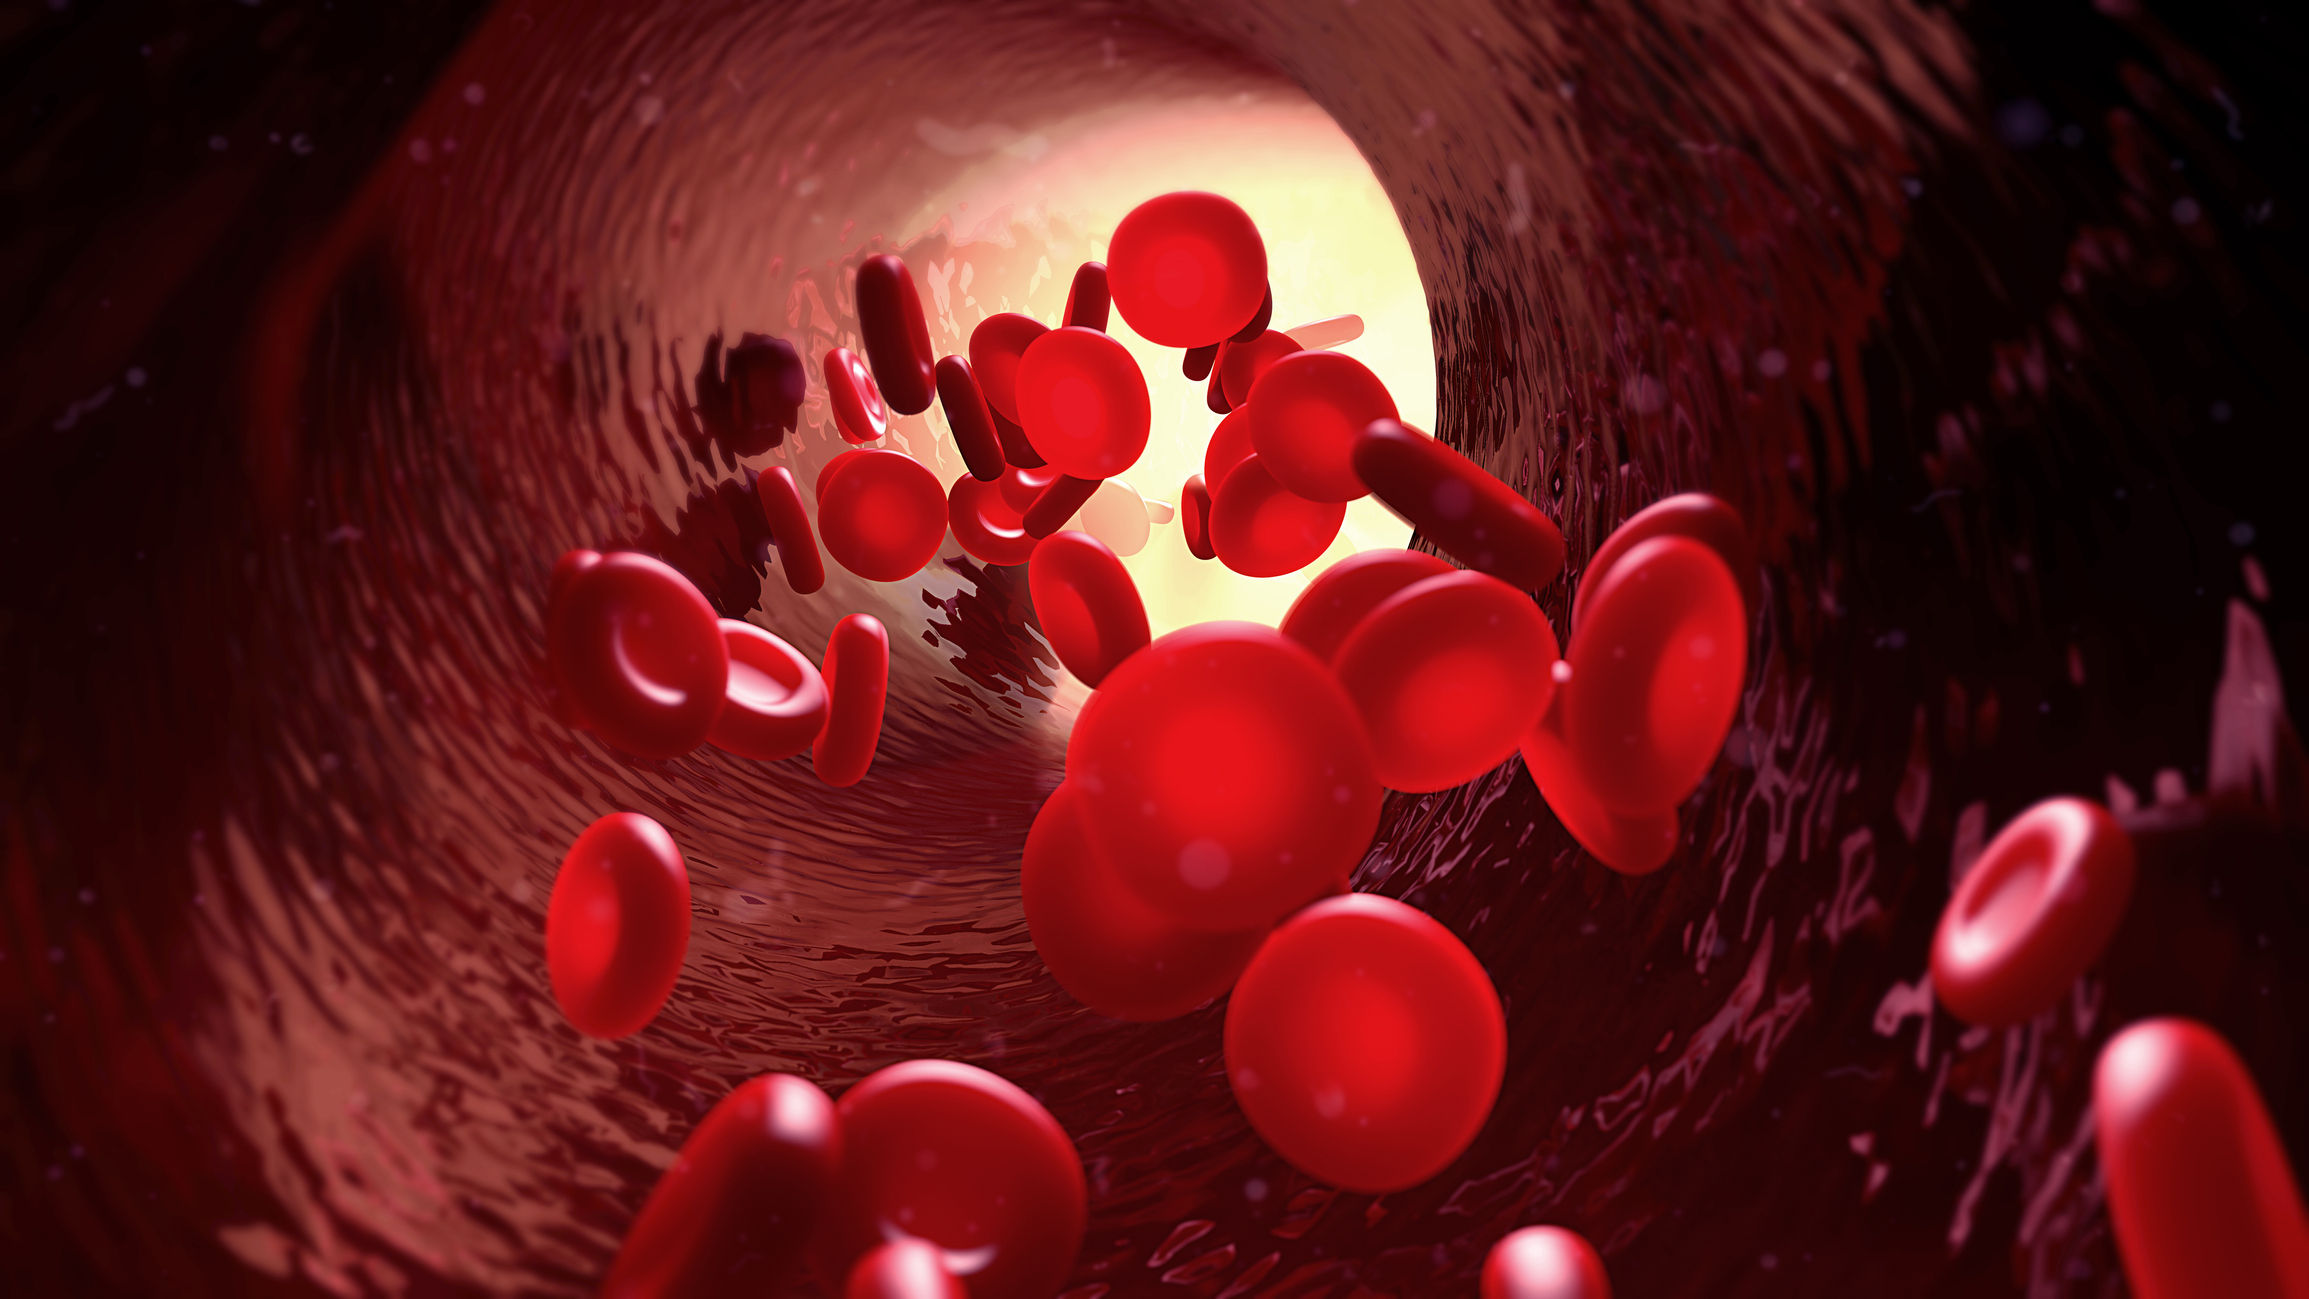 Vitamin B12 is involved in the formation of red blood cells.